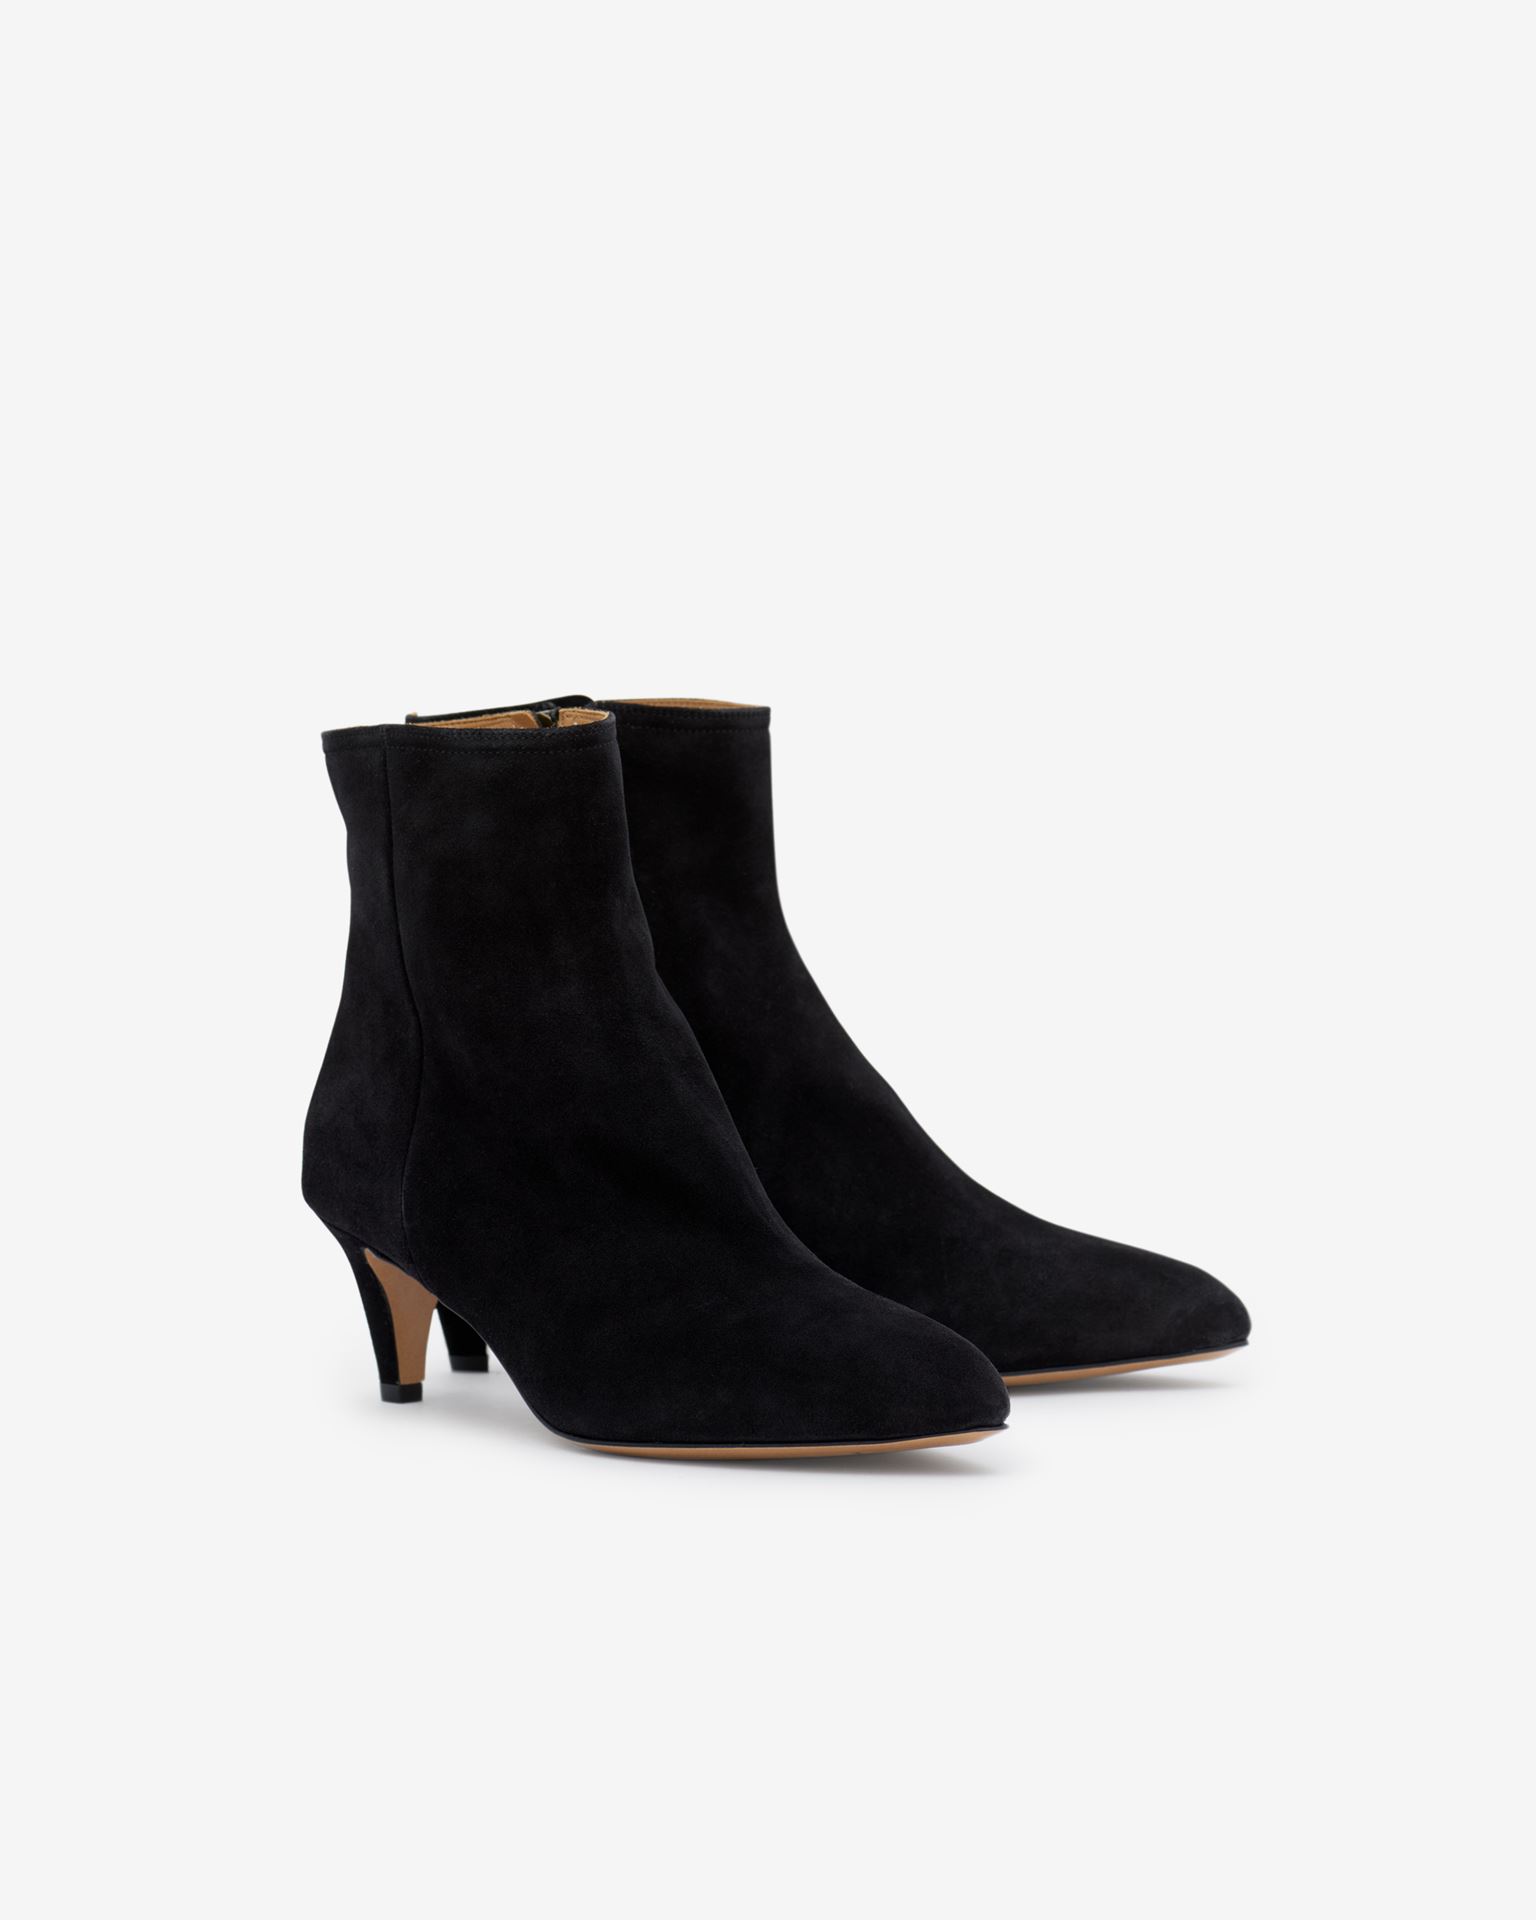 Isabel Marant, Deone Suede Leather Low Boots - Women - Black